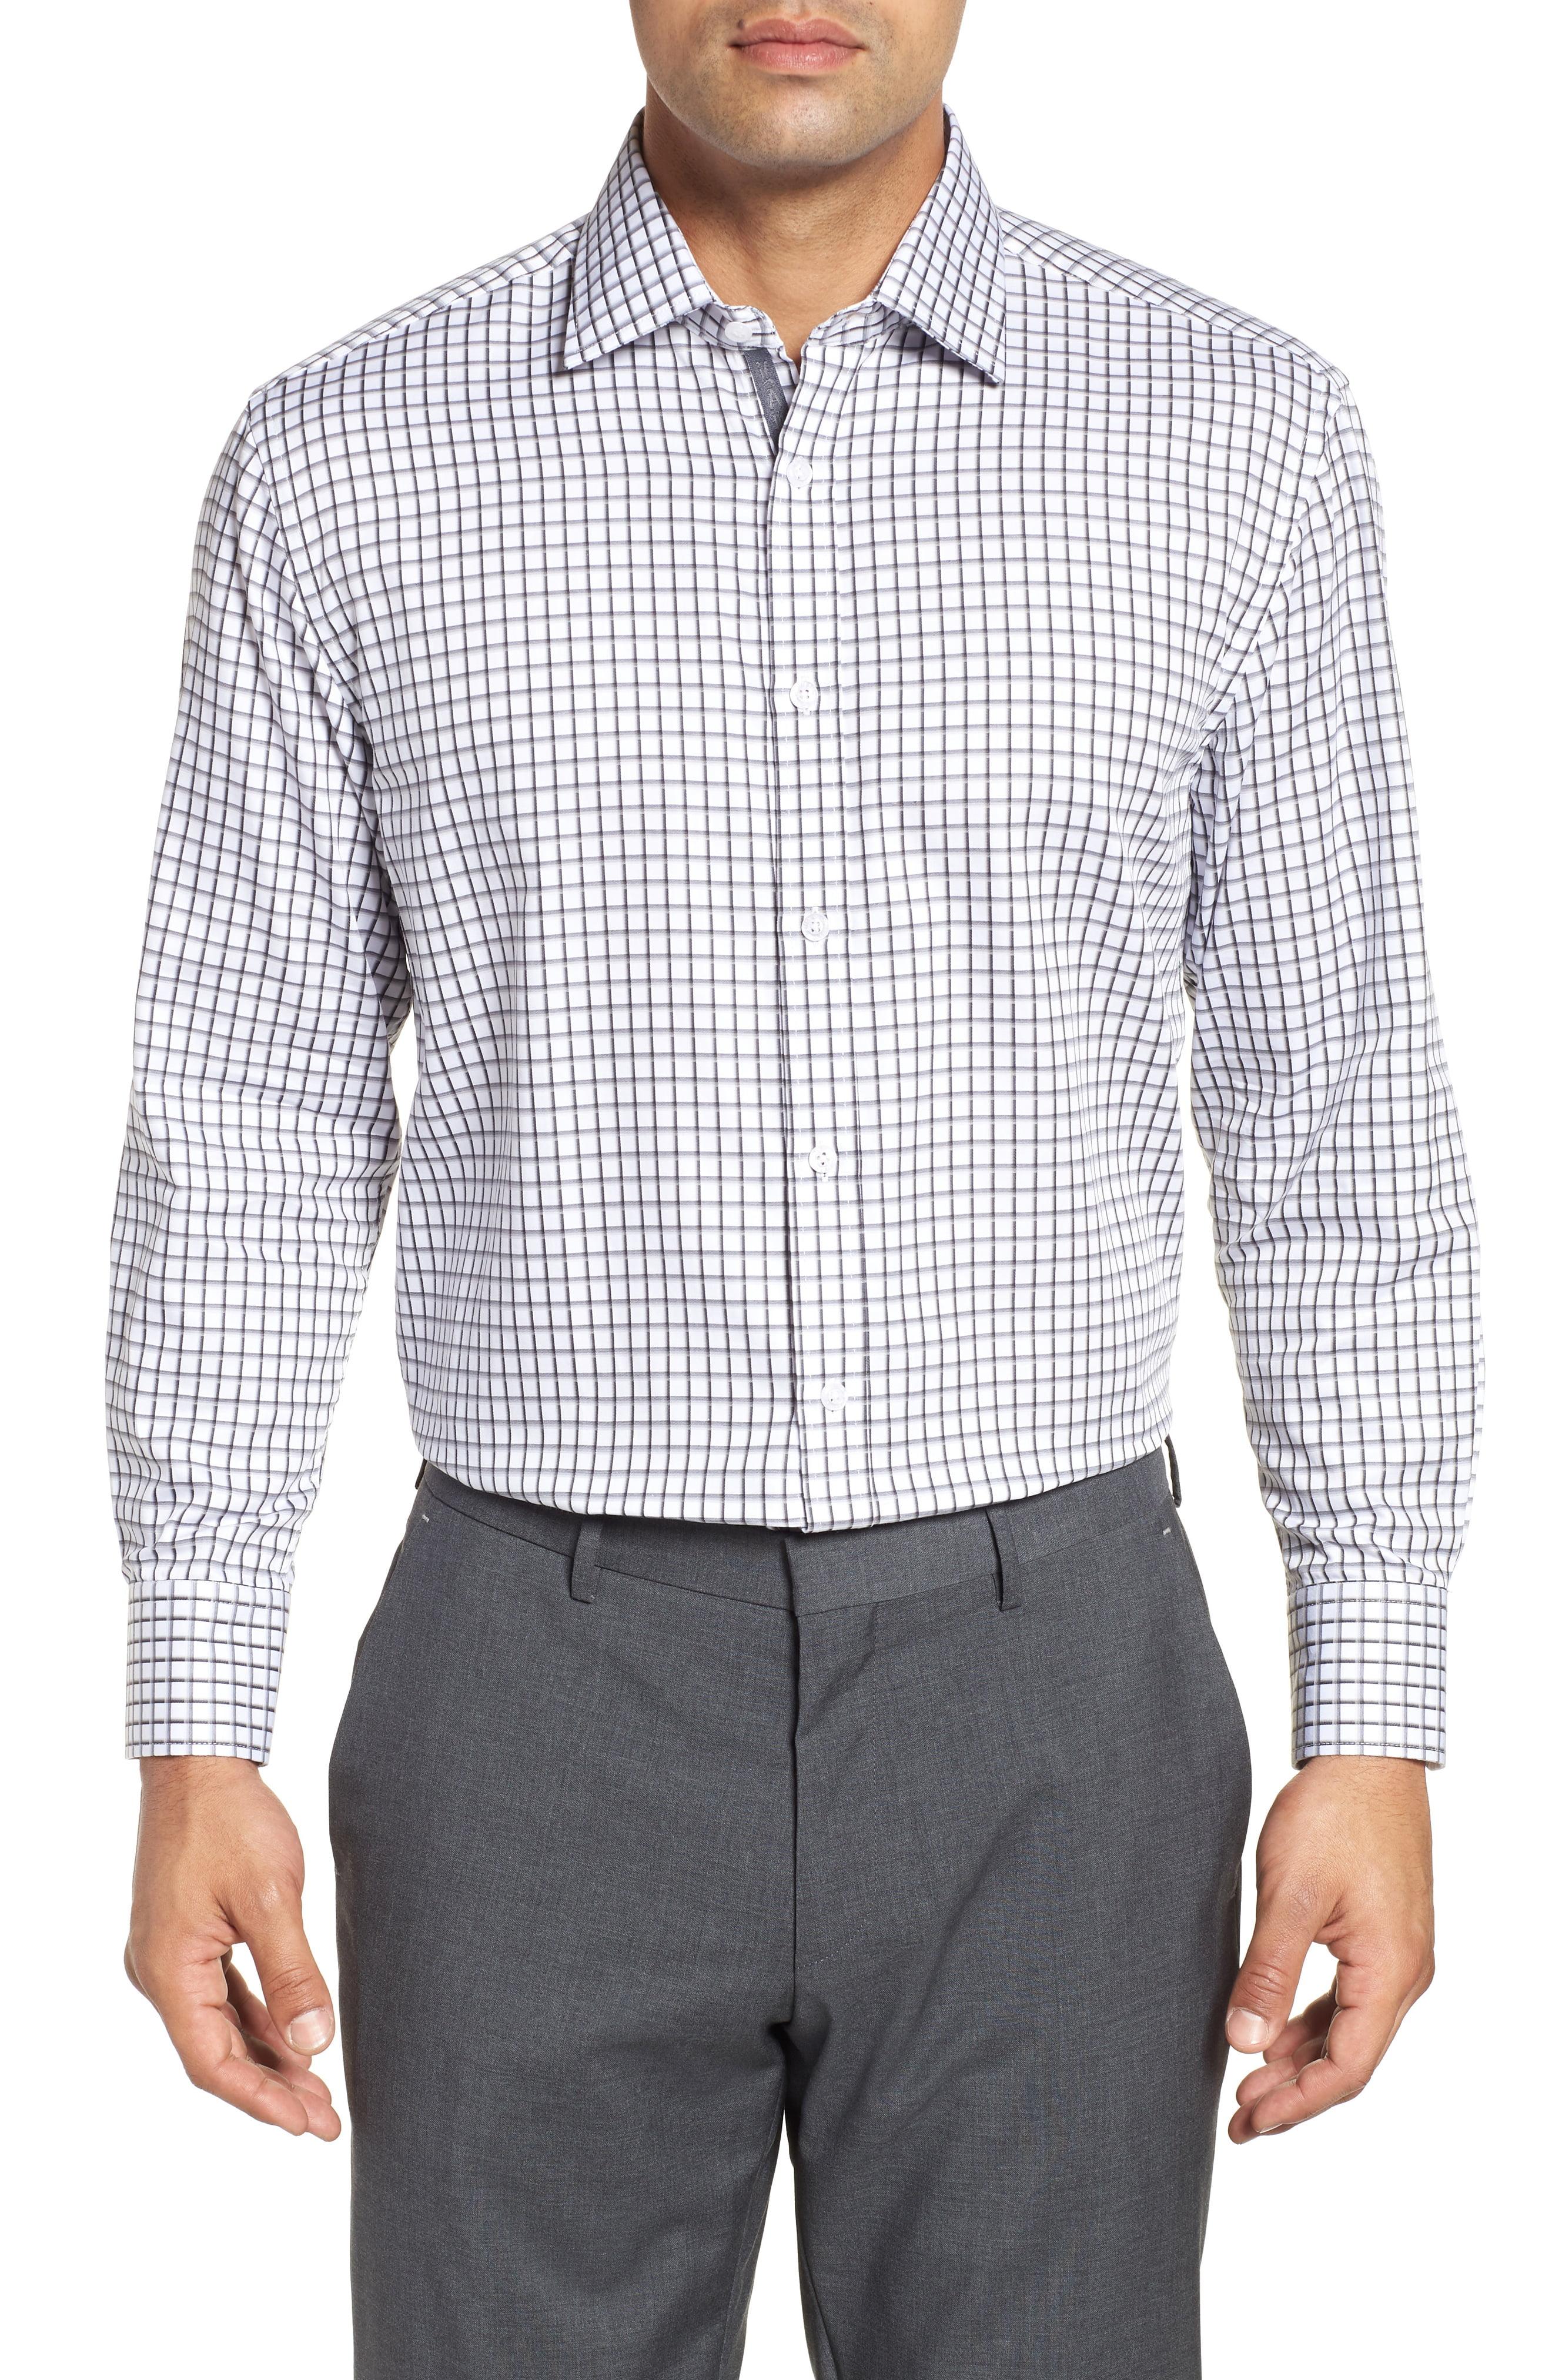 English Laundry Regular Fit Check Dress Shirt in Grey (Gray) for Men - Lyst